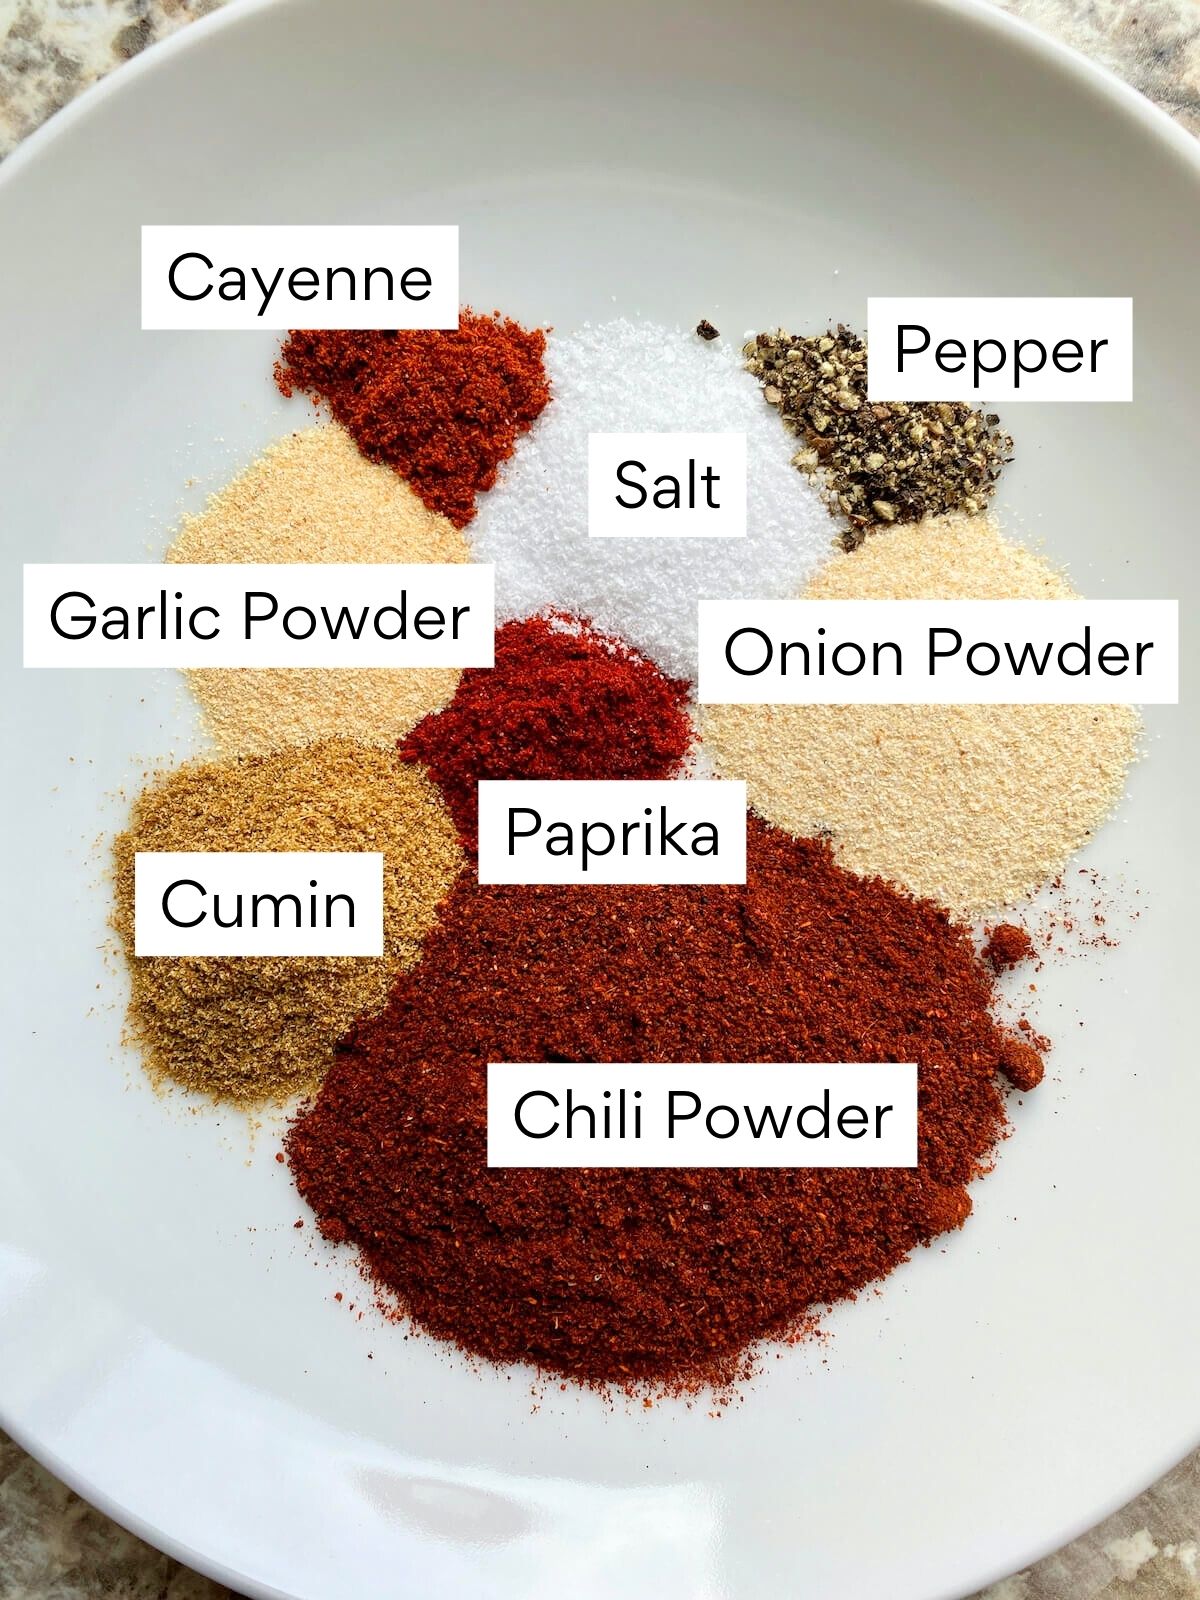 The ingredients to make homemade chili seasoning. Each ingredient is labeled with text. They include chili powder, cumin, garlic powder, paprika, onion powder, cayenne, salt, and pepper.